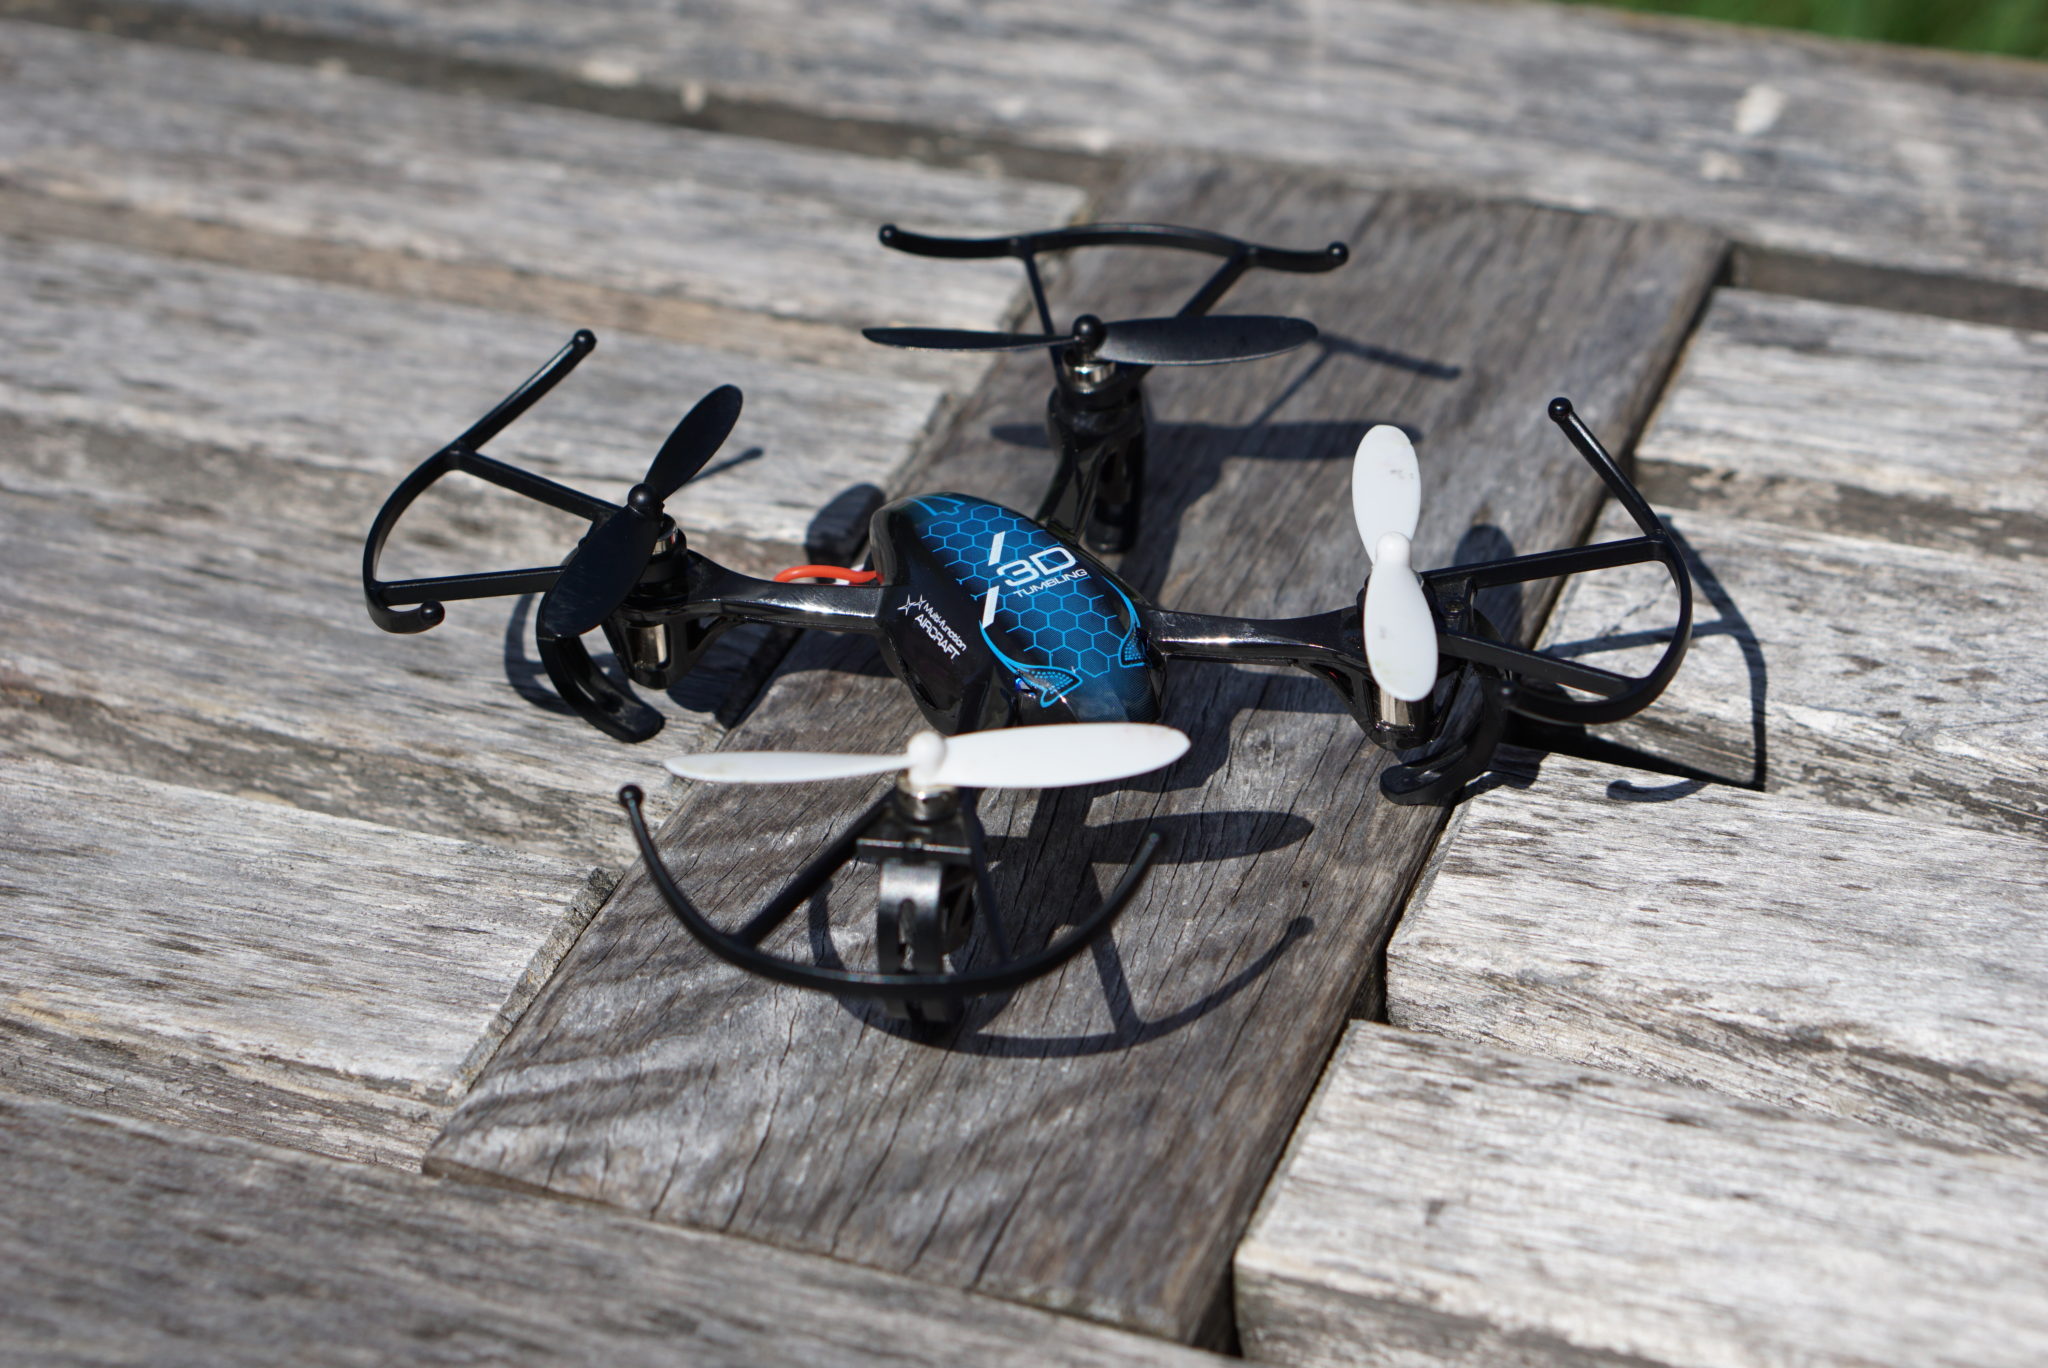 Holy Stone HS170 Predator: A Top Selling Amazon Drone Half Chrome Drones